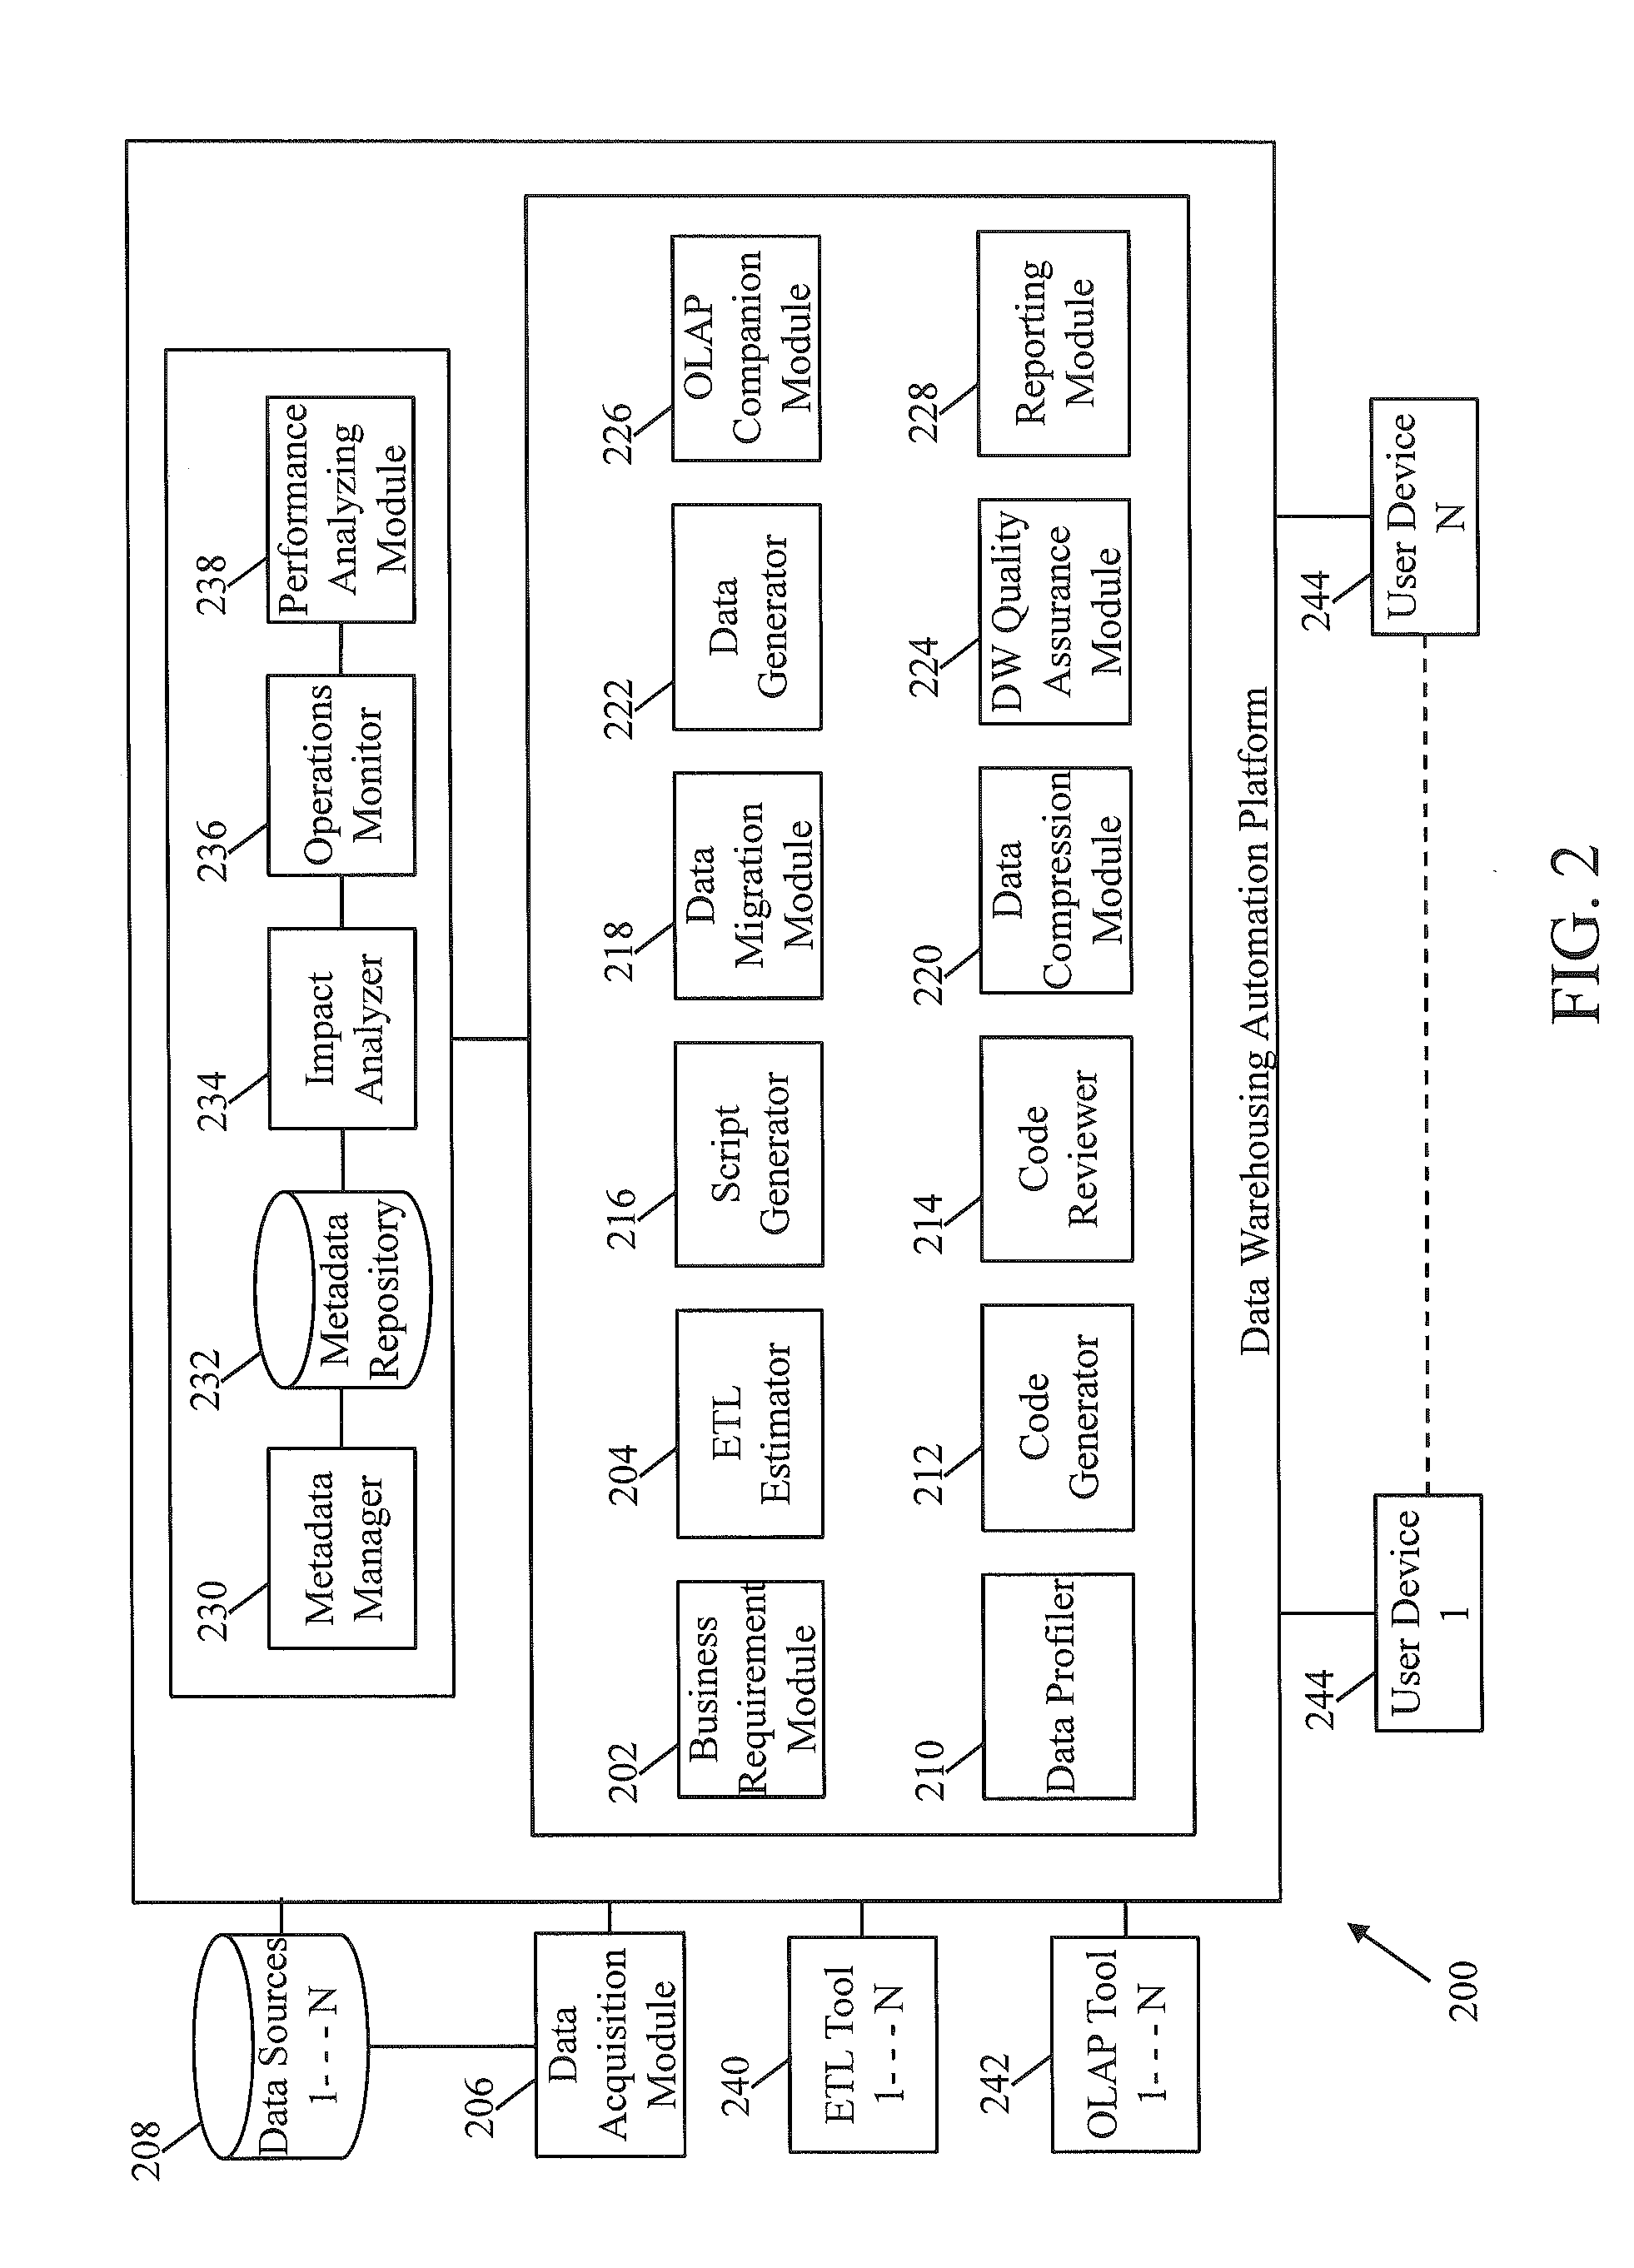 System and method for automating data warehousing processes